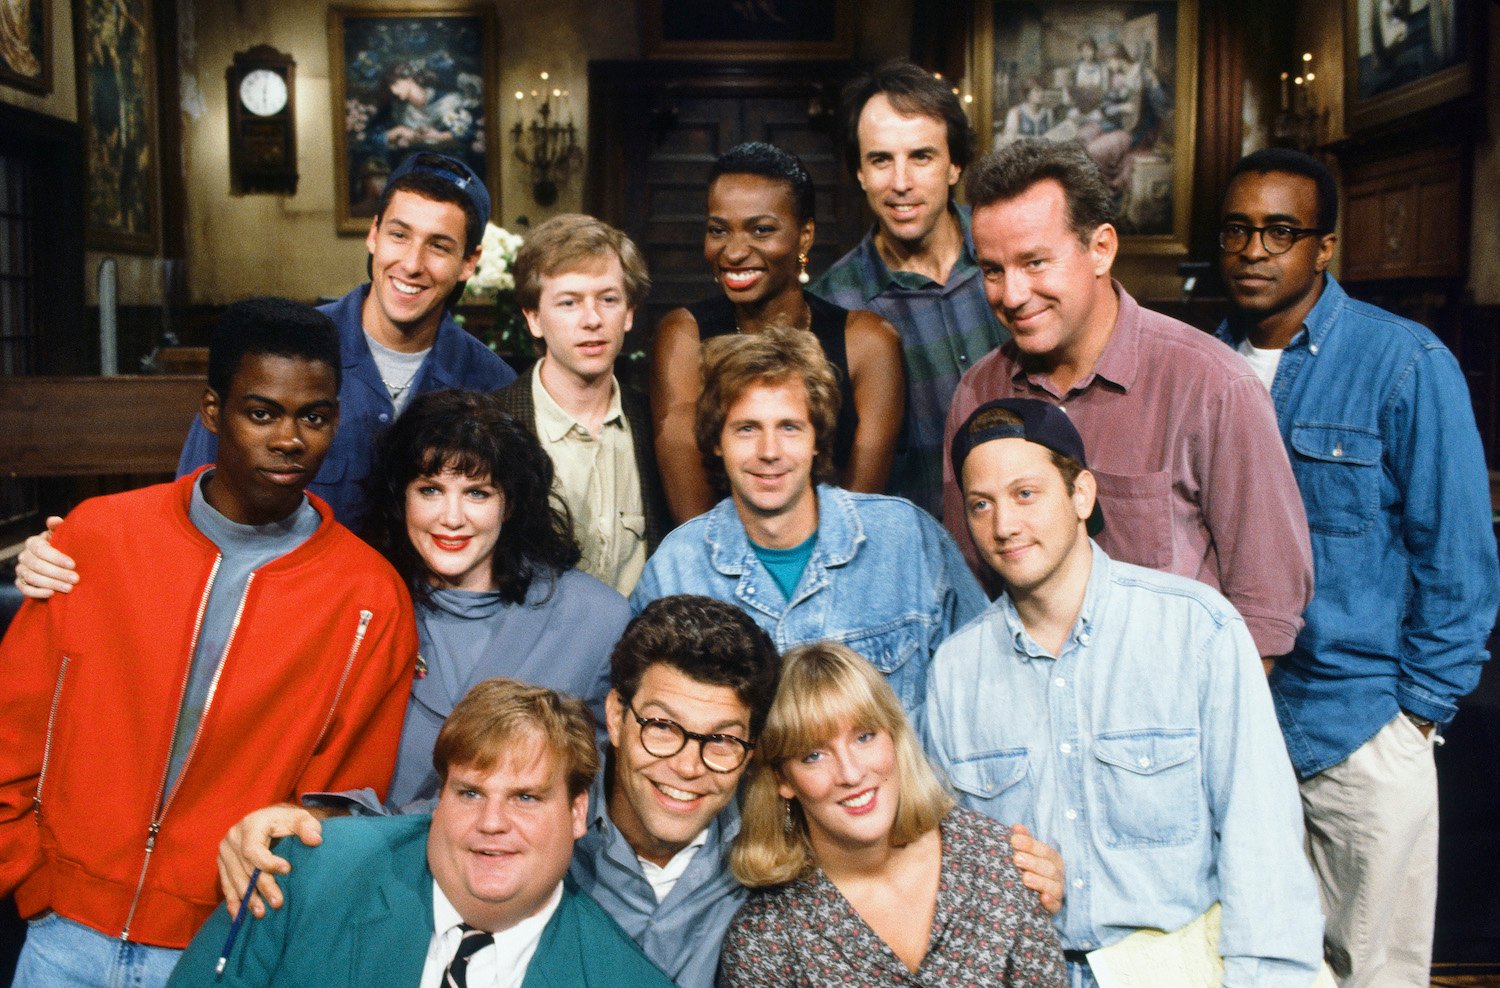 Chris Farley with the 'SNL' cast in season 18